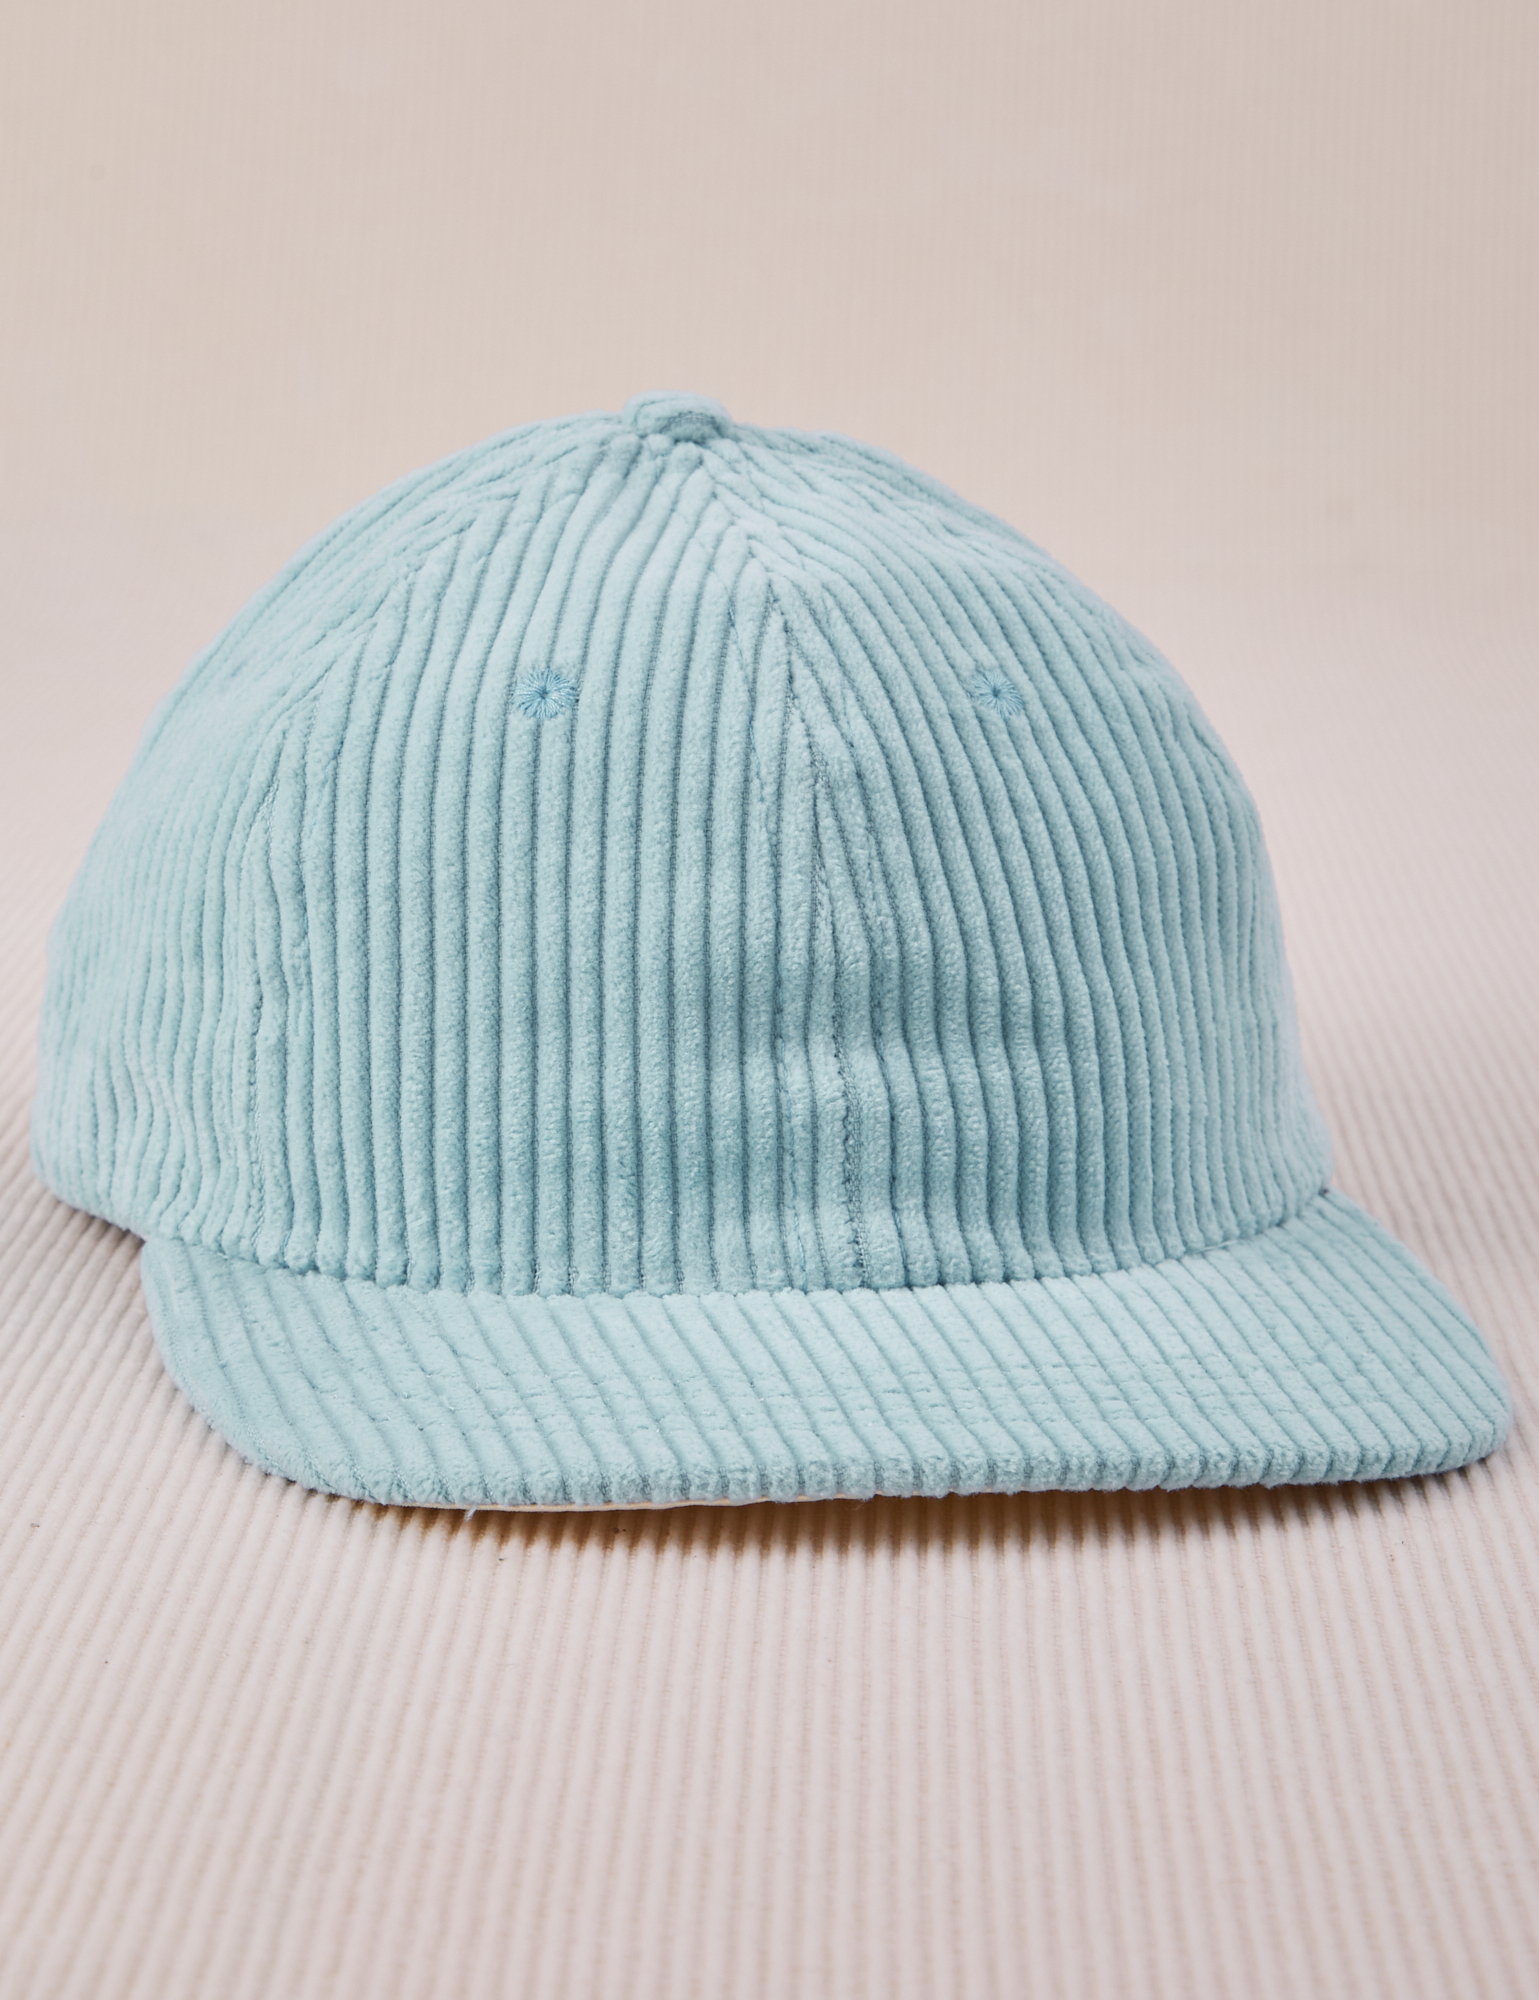 Dugout Corduroy Hat in Baby Blue